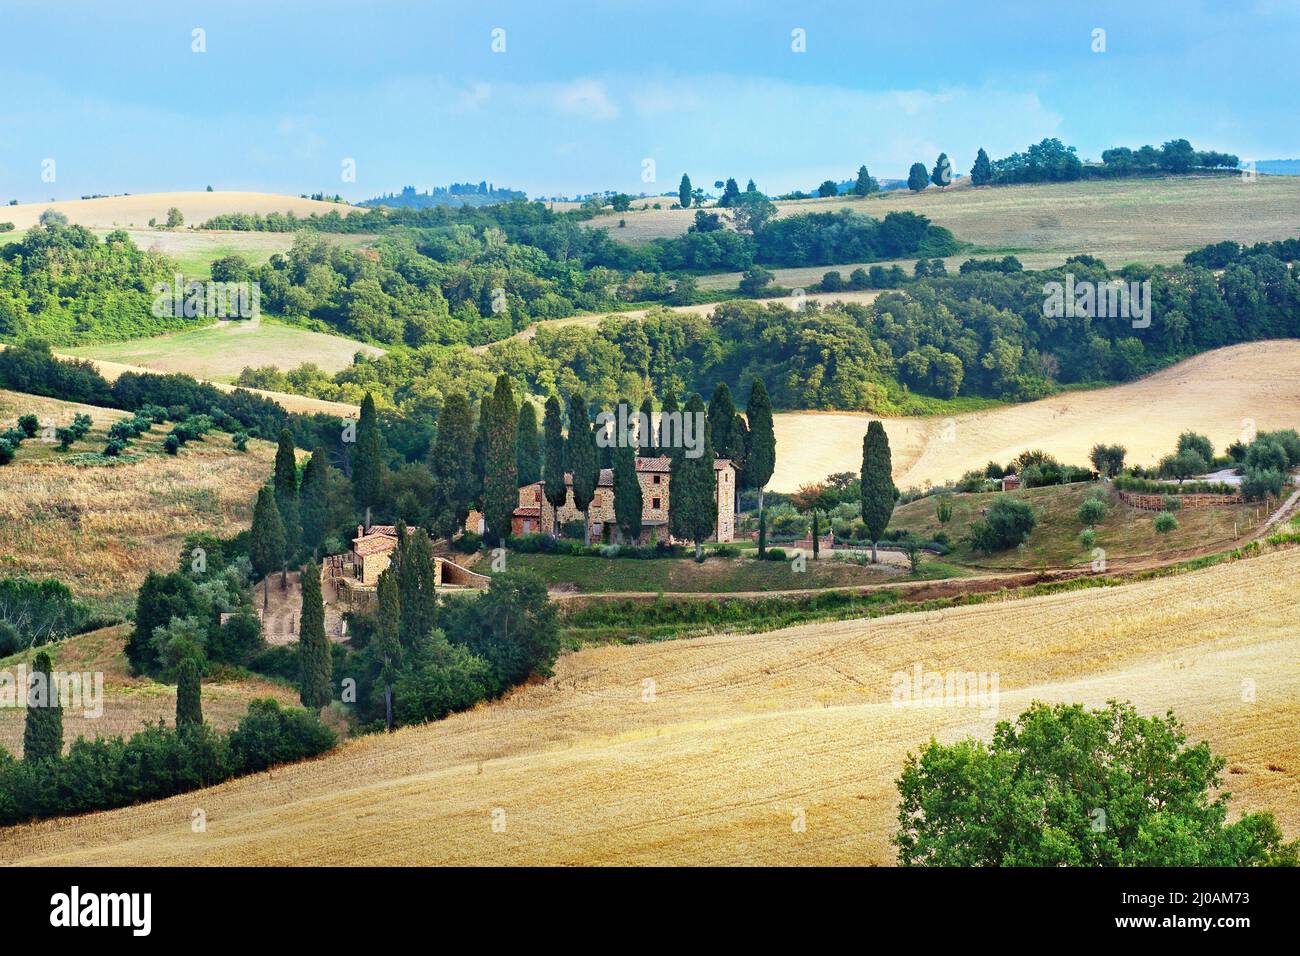 Rural countryside landscape in Tuscany region of Italy Stock Photo